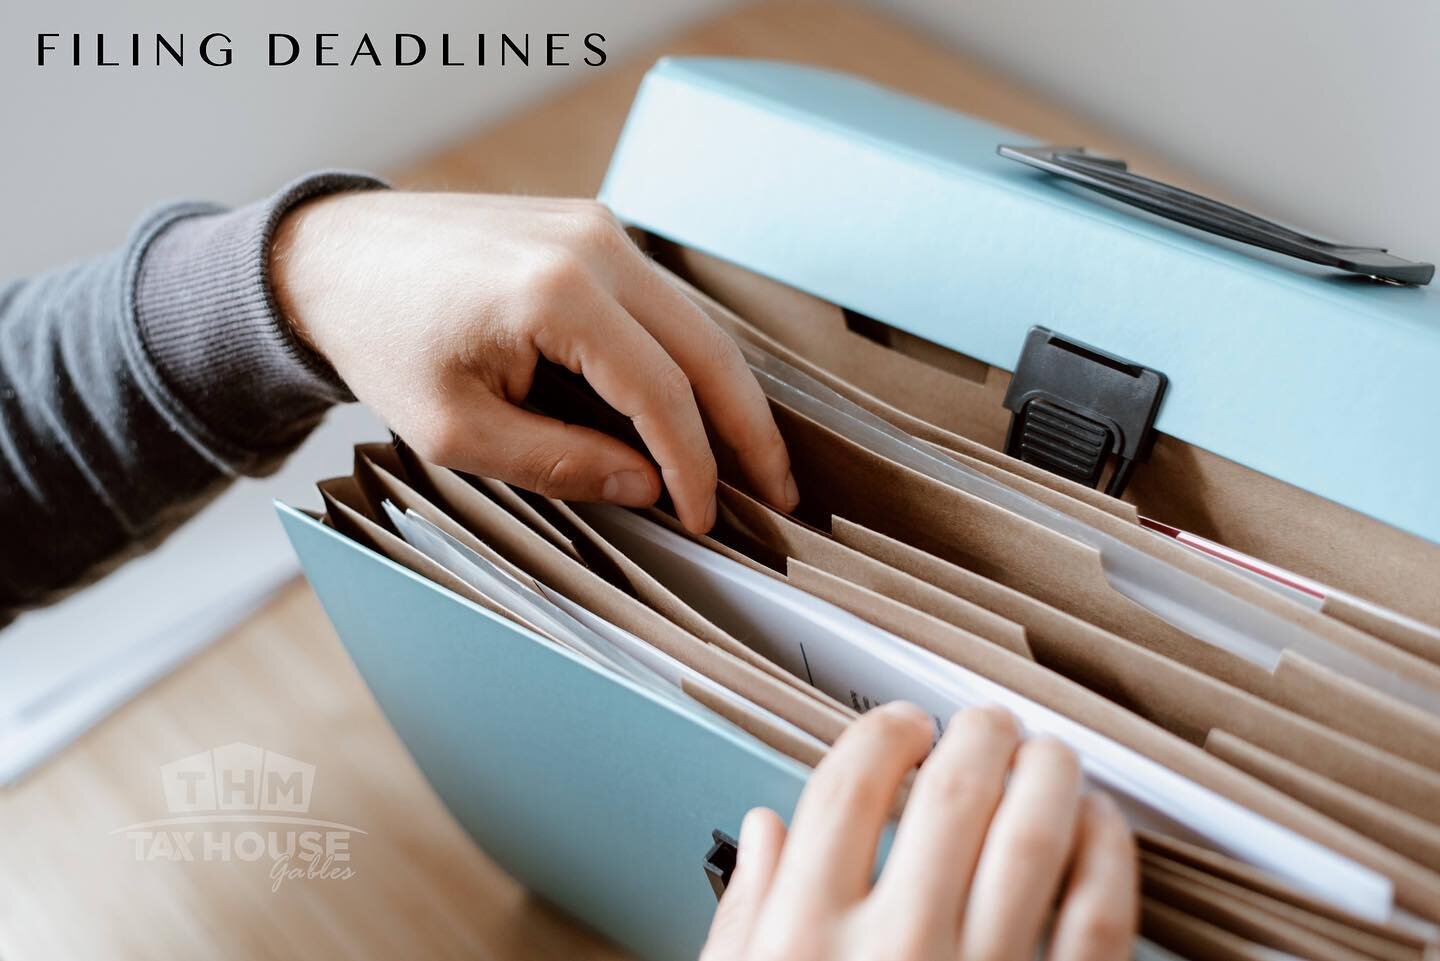 March 15th is the DEADLINE for CORPORATIONS 🗓

April 15 is the DEADLINE for PERSONAL tax filing 🗓

DID YOU KNOW

#TaxPayers who collect #refunds from the #IRS can file after April 15th with no penalty? 

Tax Payers who owe money to the IRS can file